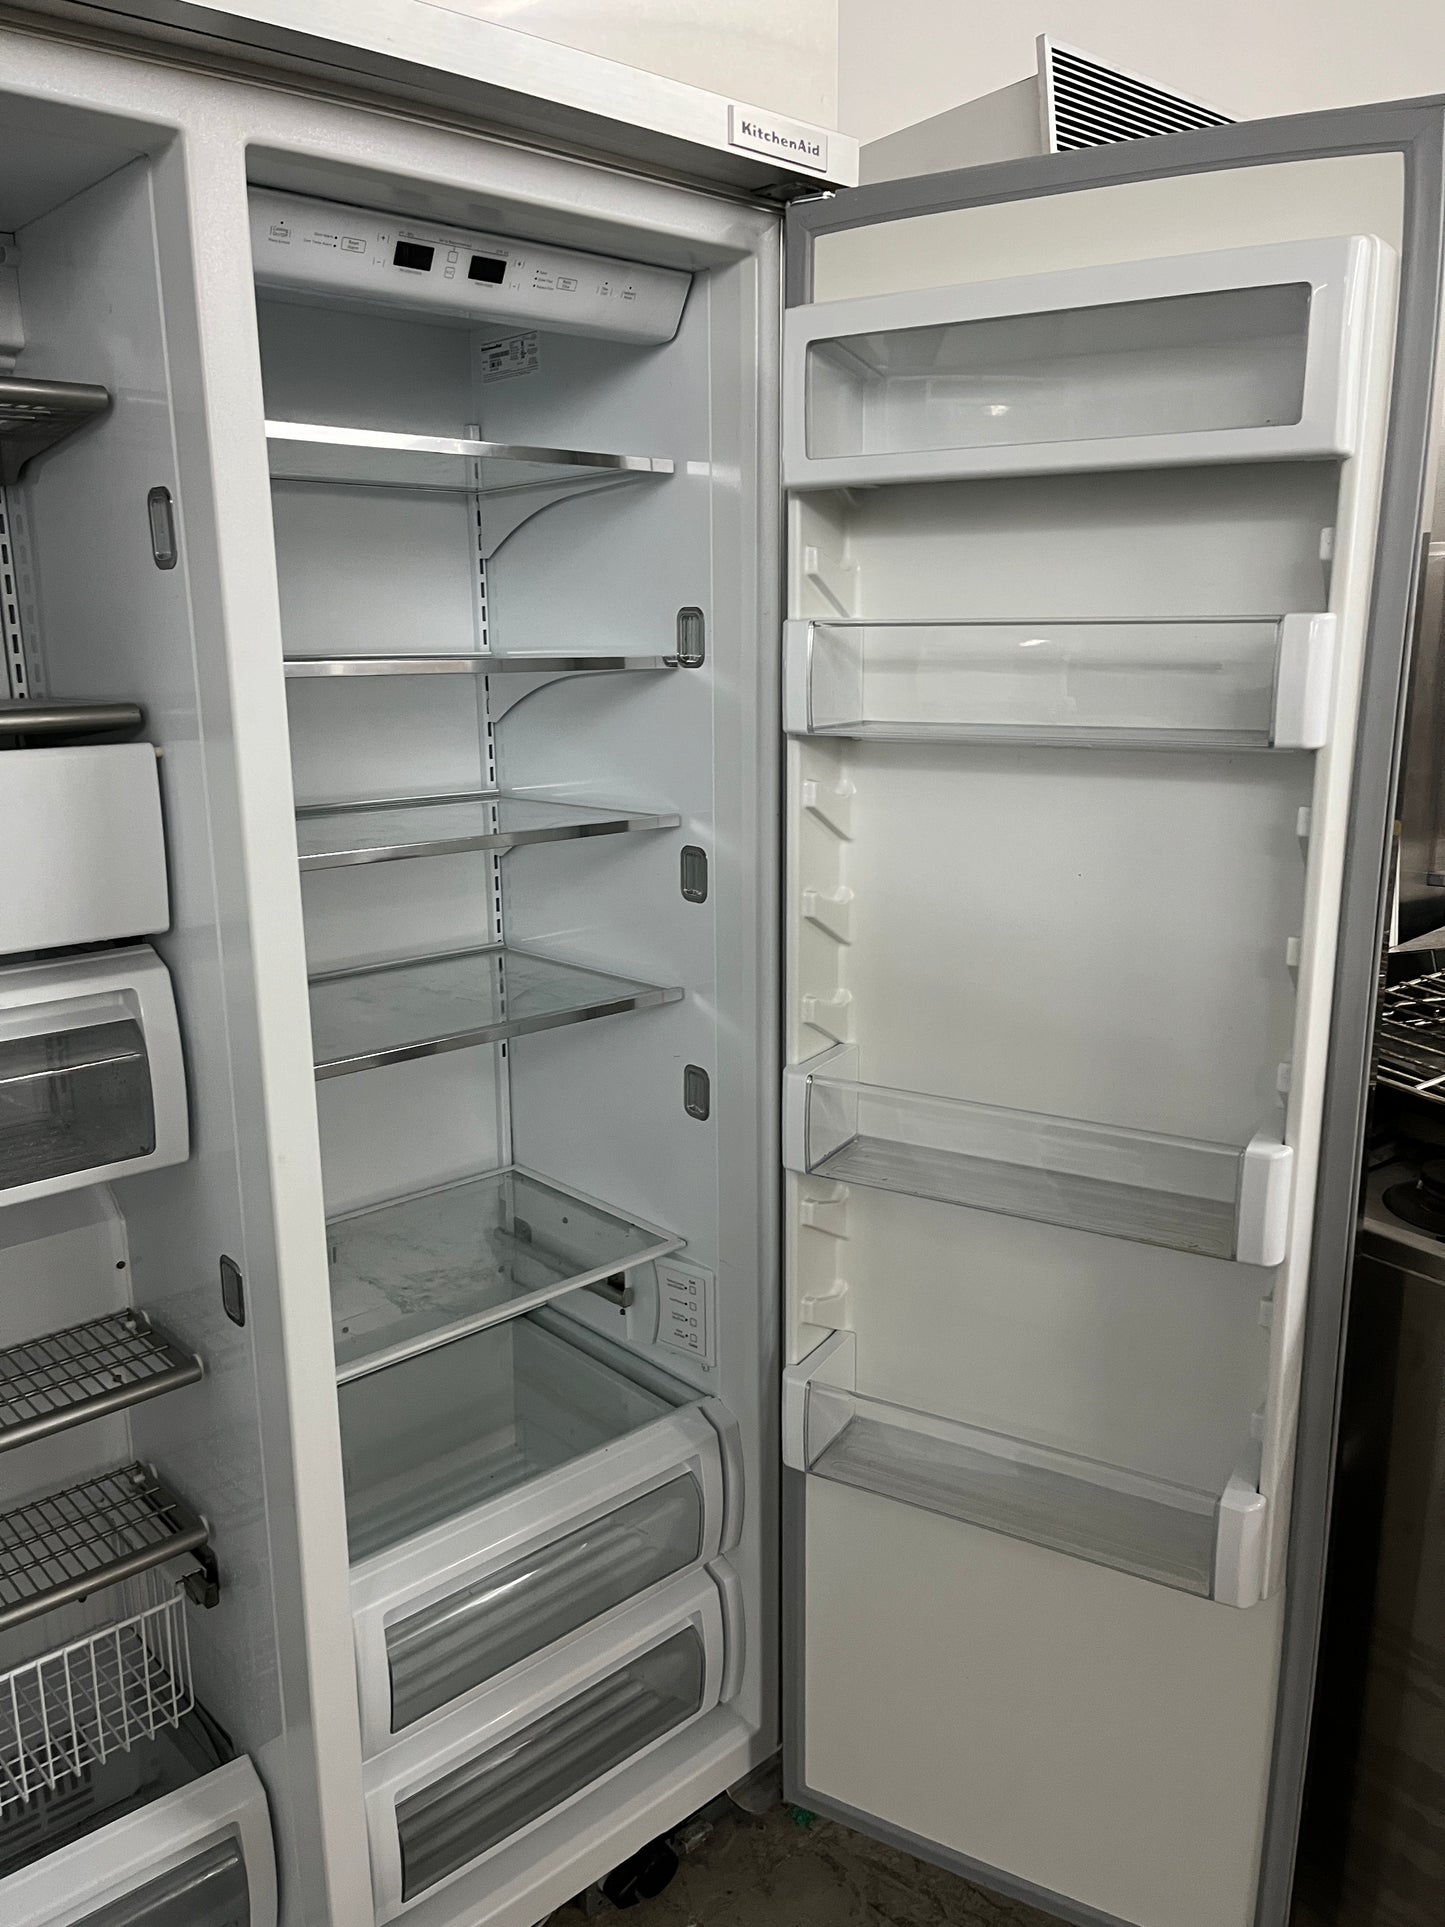 KitchenAid 42 Inch KBSN602ESS  Built In Side by Side Refrigerator in Stainless Steel, 369257